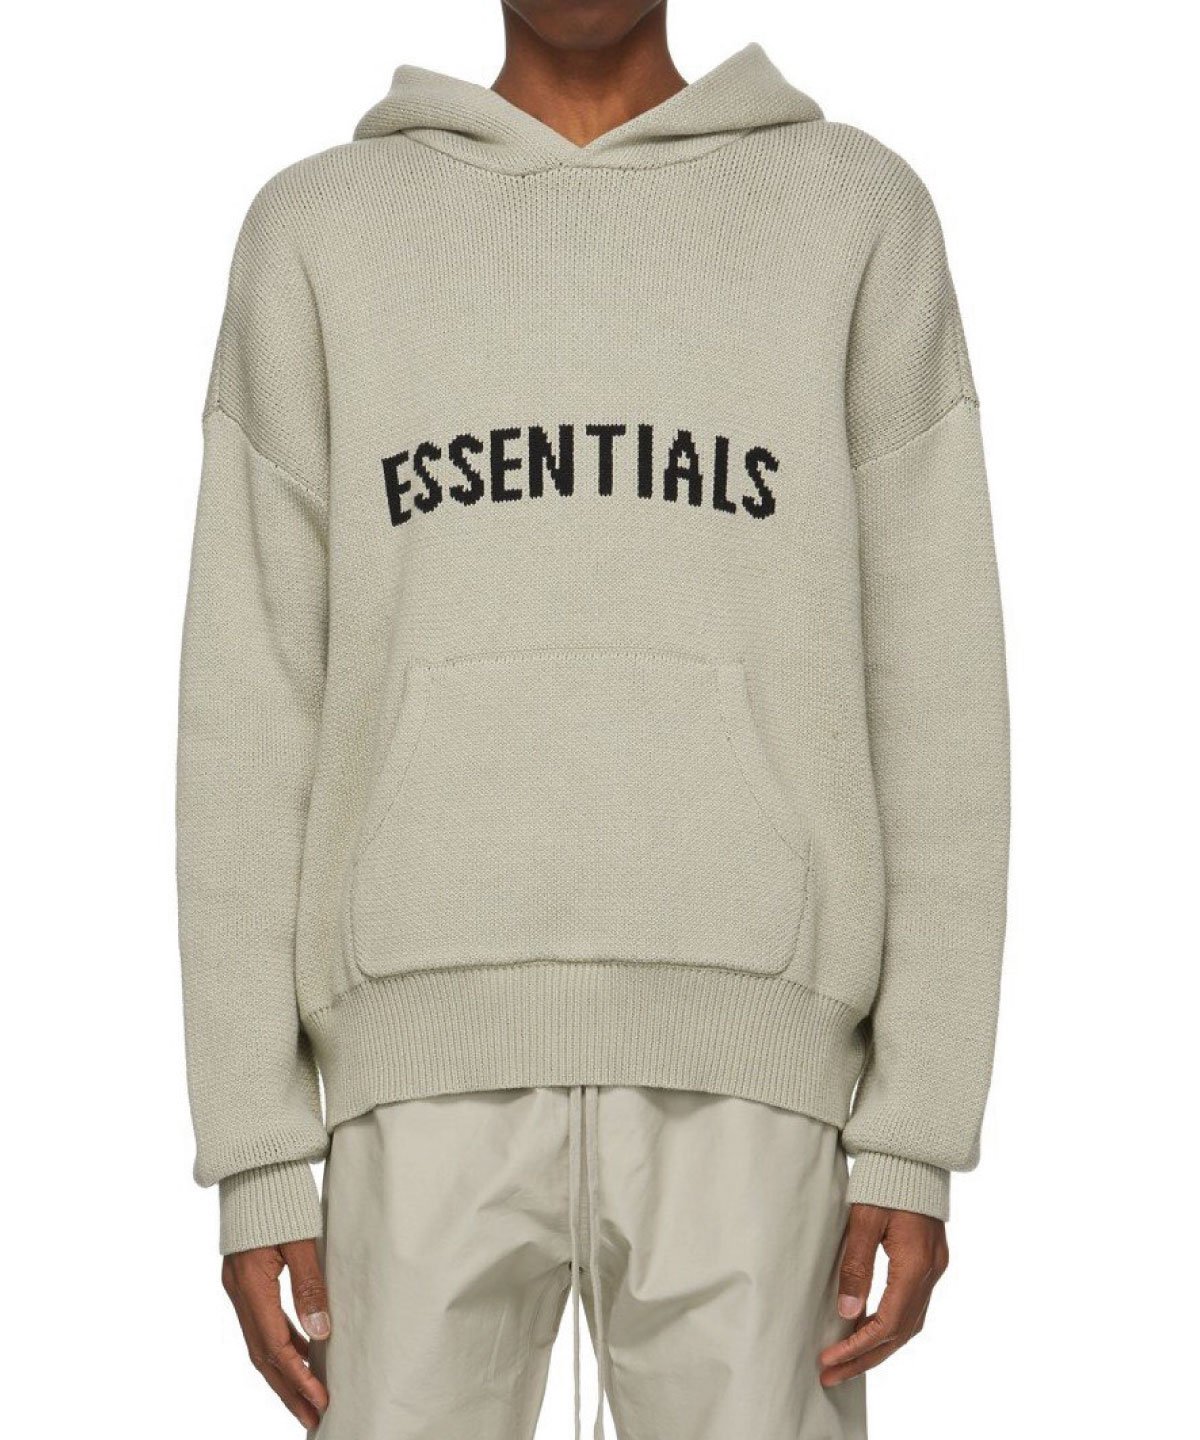 FOG ESSENTIALS ニットパーカー Fear Of God Essentials Hoodie front logo knit TAUPE